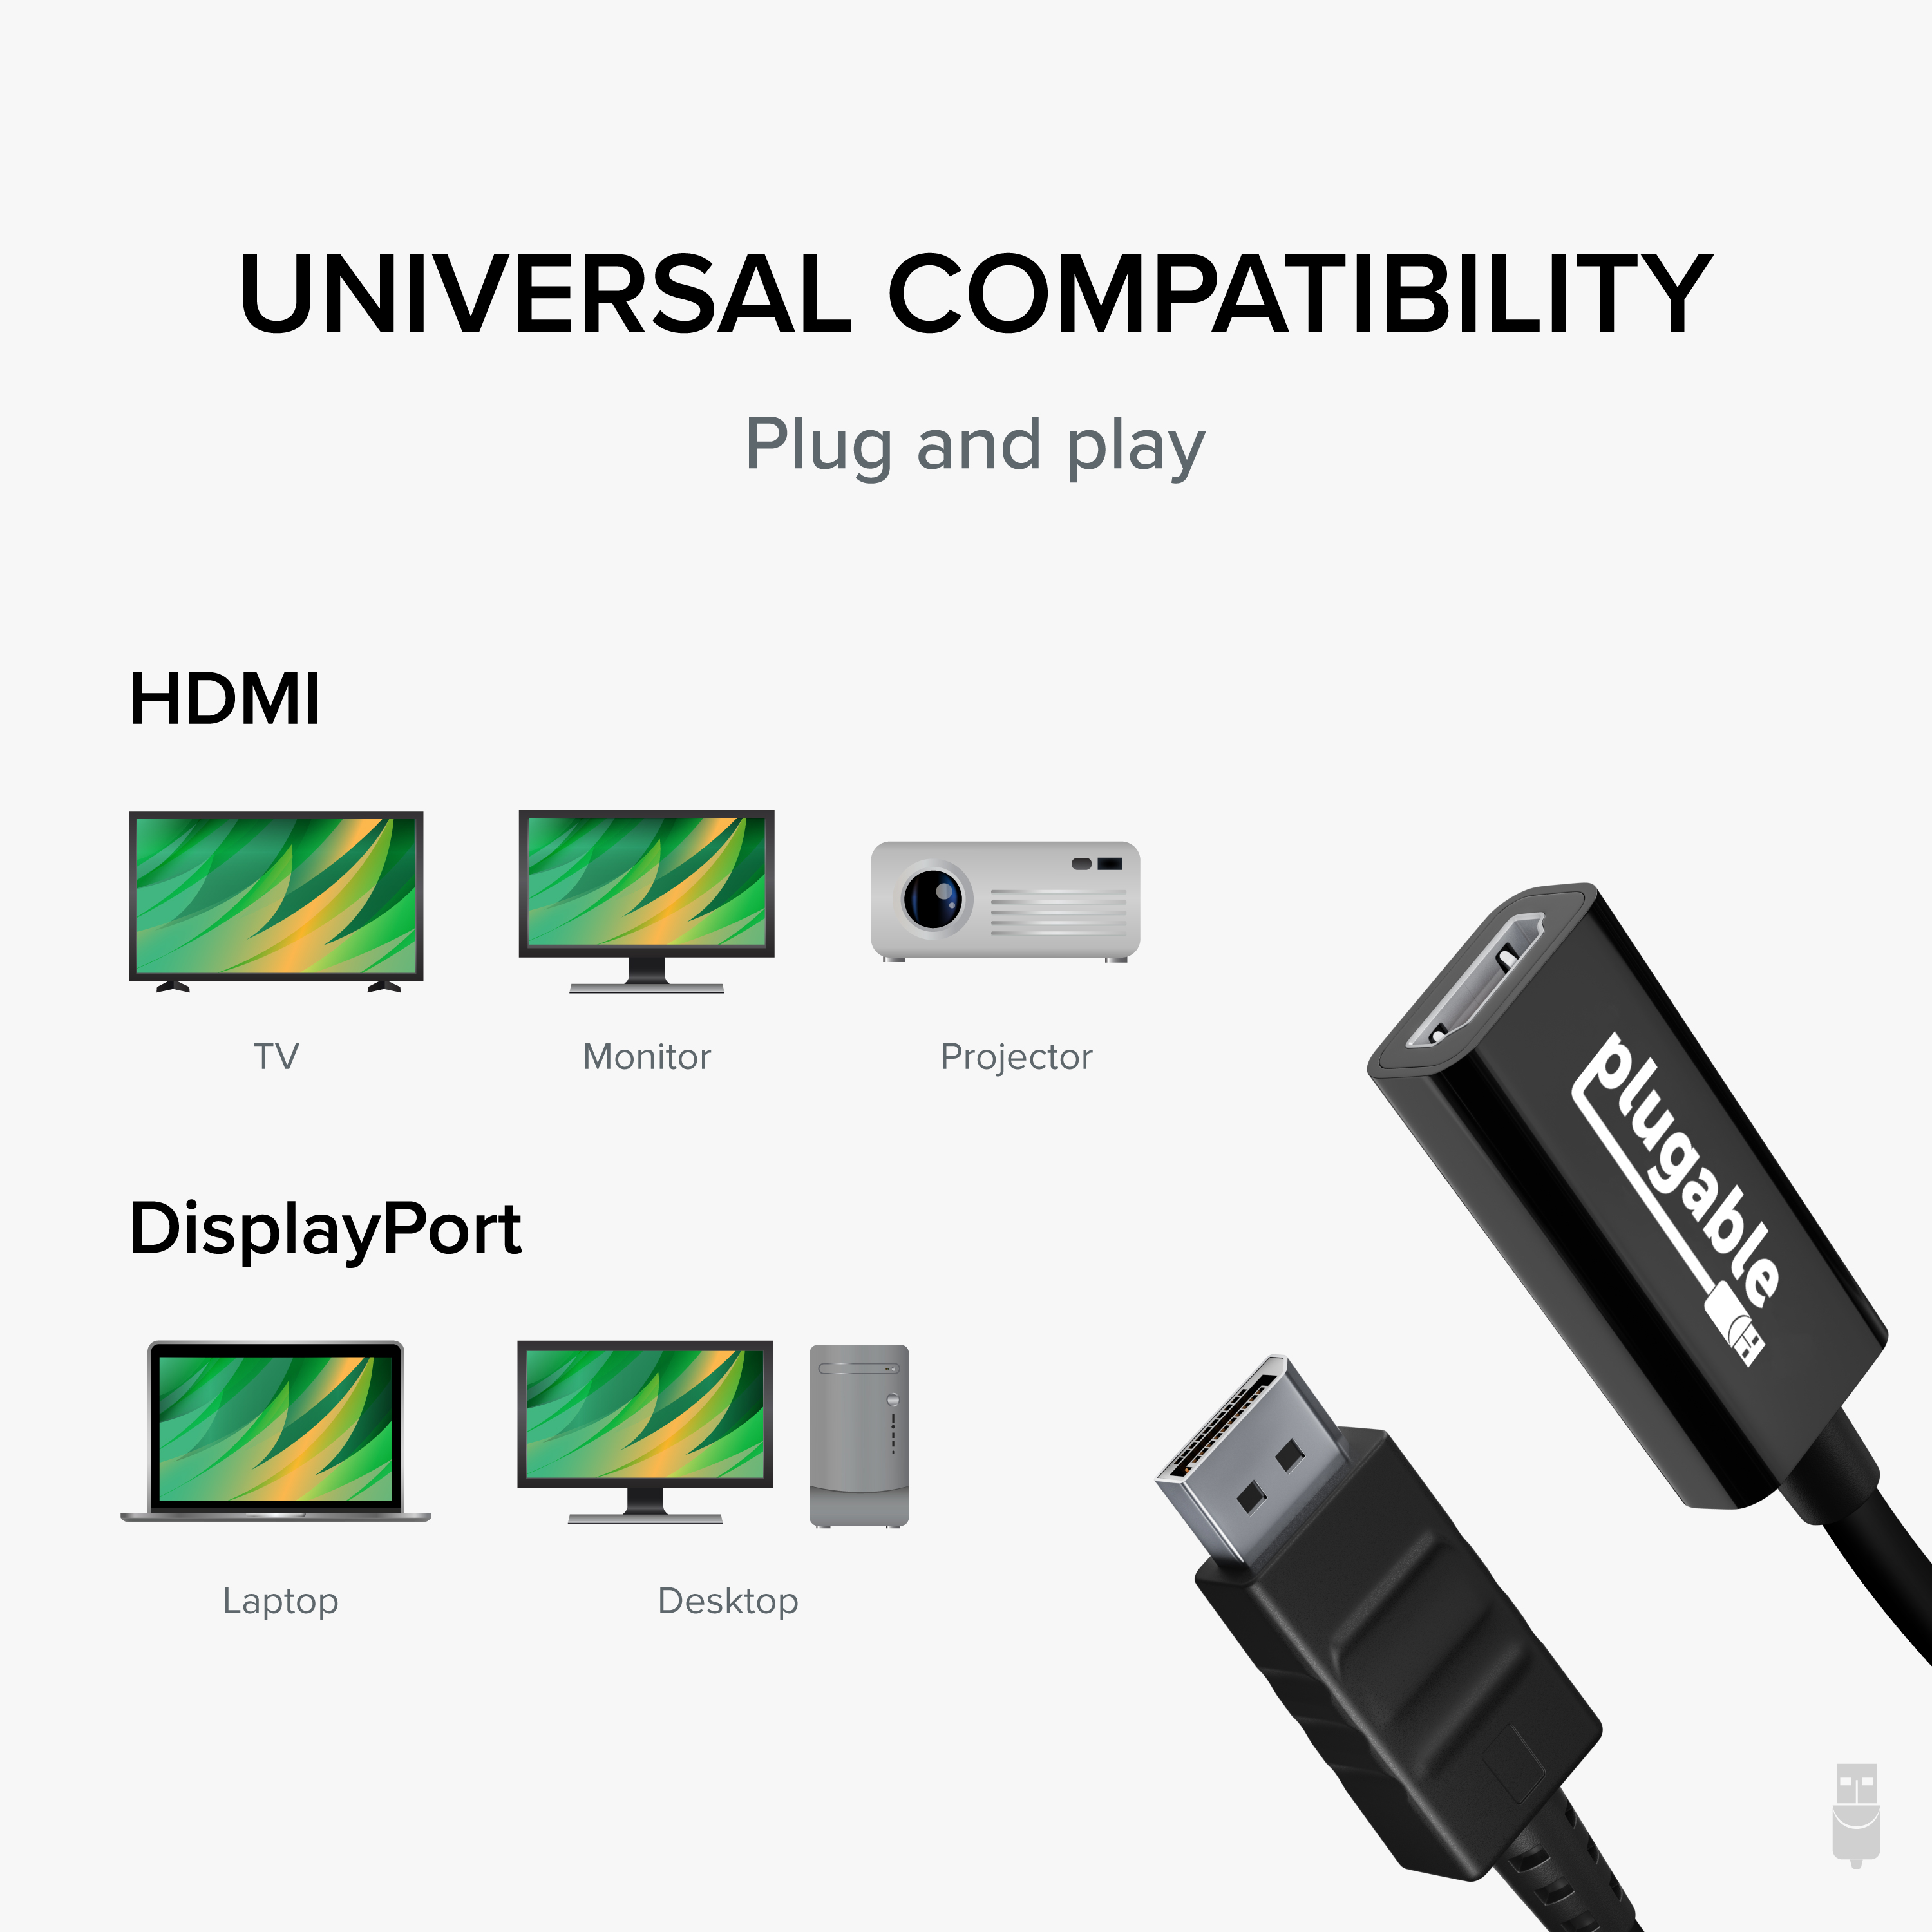 Plugable Active DisplayPort to HDMI Adapter - Connect any DisplayPort-Enabled PC or Tablet to an HDMI Enabled Monitor, TV or Projector for Ultra-HD Video Streaming (HDMI 2.0 up to 4K 3840x2160 @60Hz) - image 3 of 6